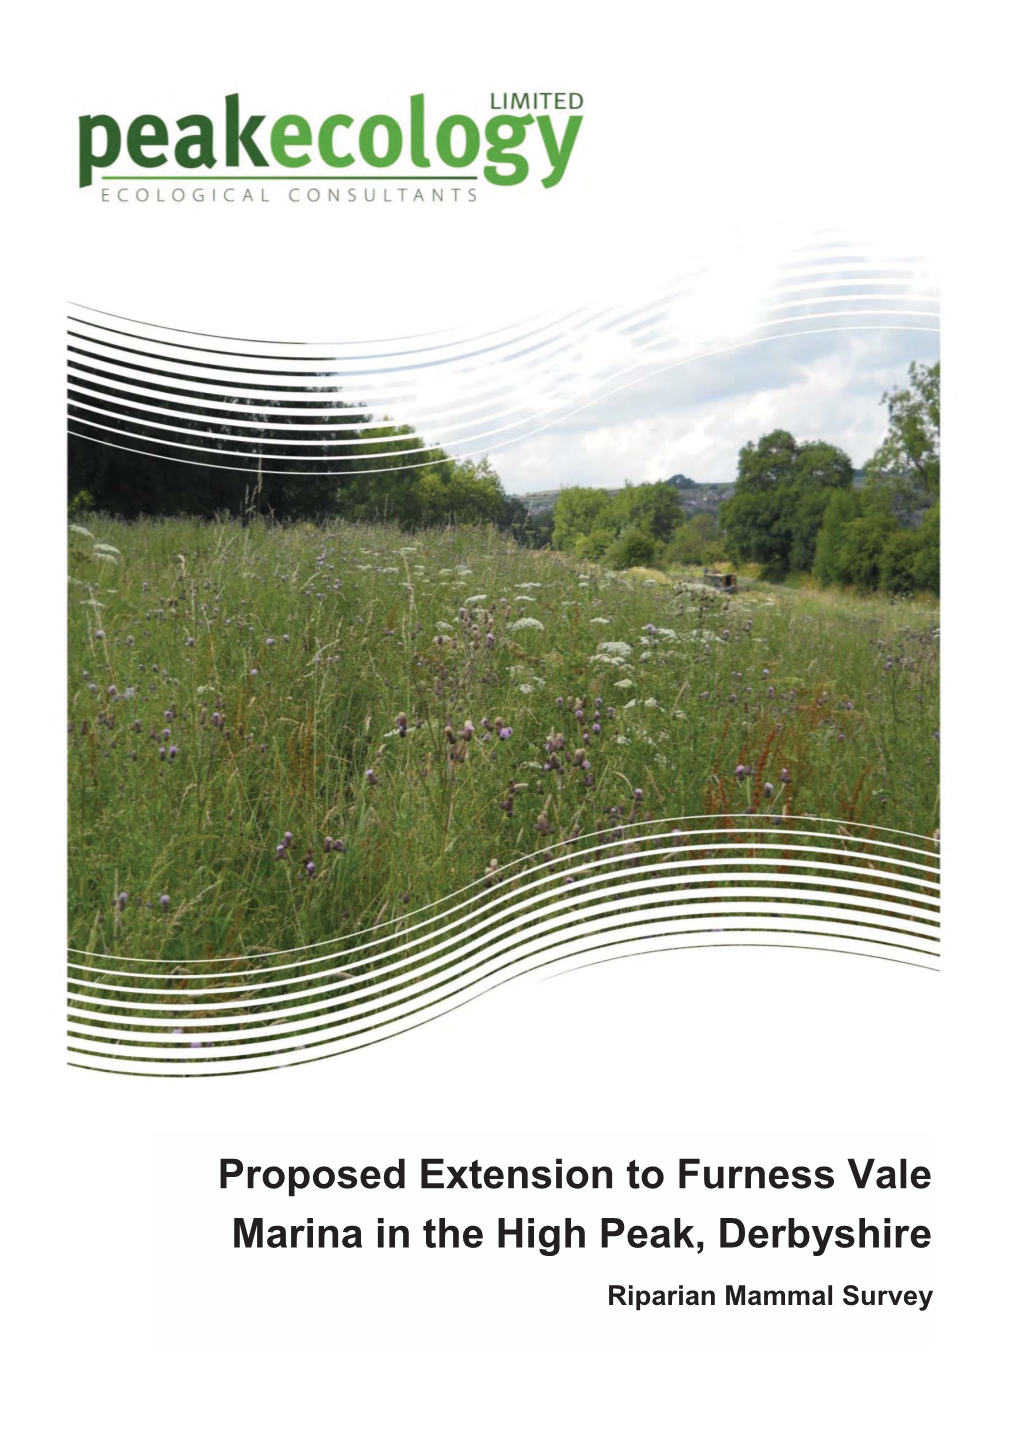 Proposed Extension to Furness Vale Marina in the High Peak, Derbyshire